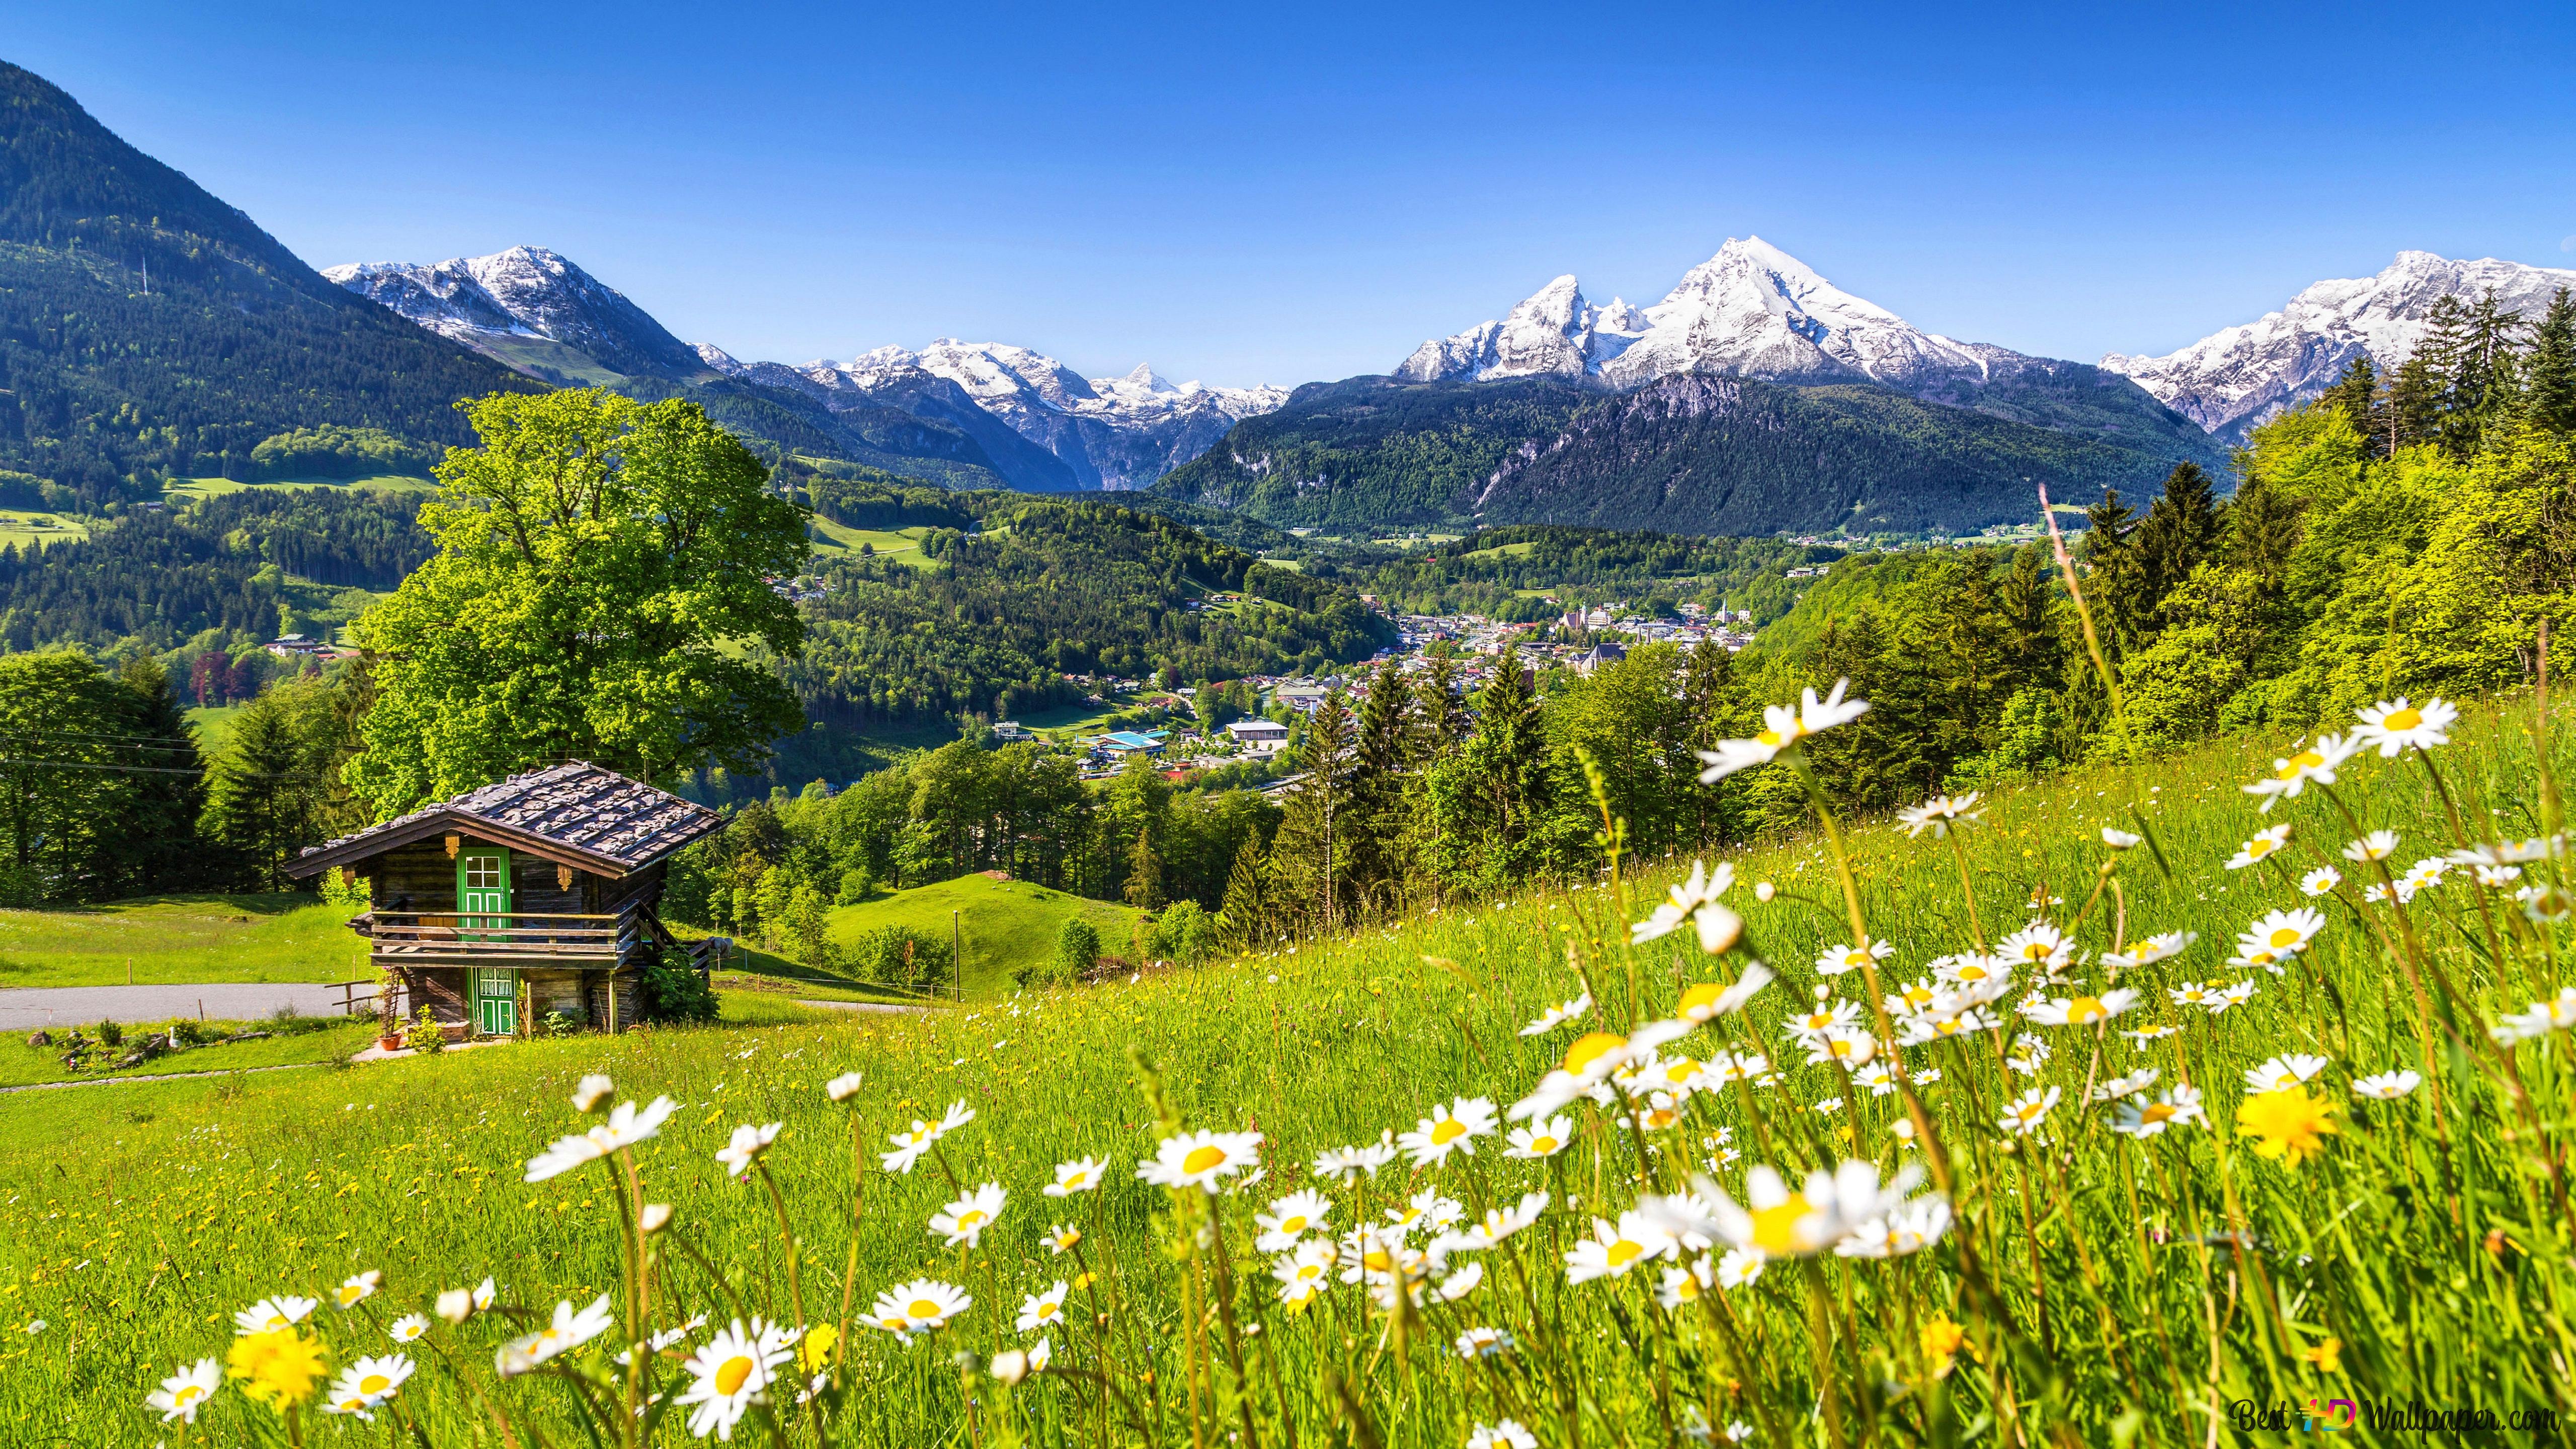 Snowy hills and cottage landscape surrounded by daisies and trees 8K wallpaper download